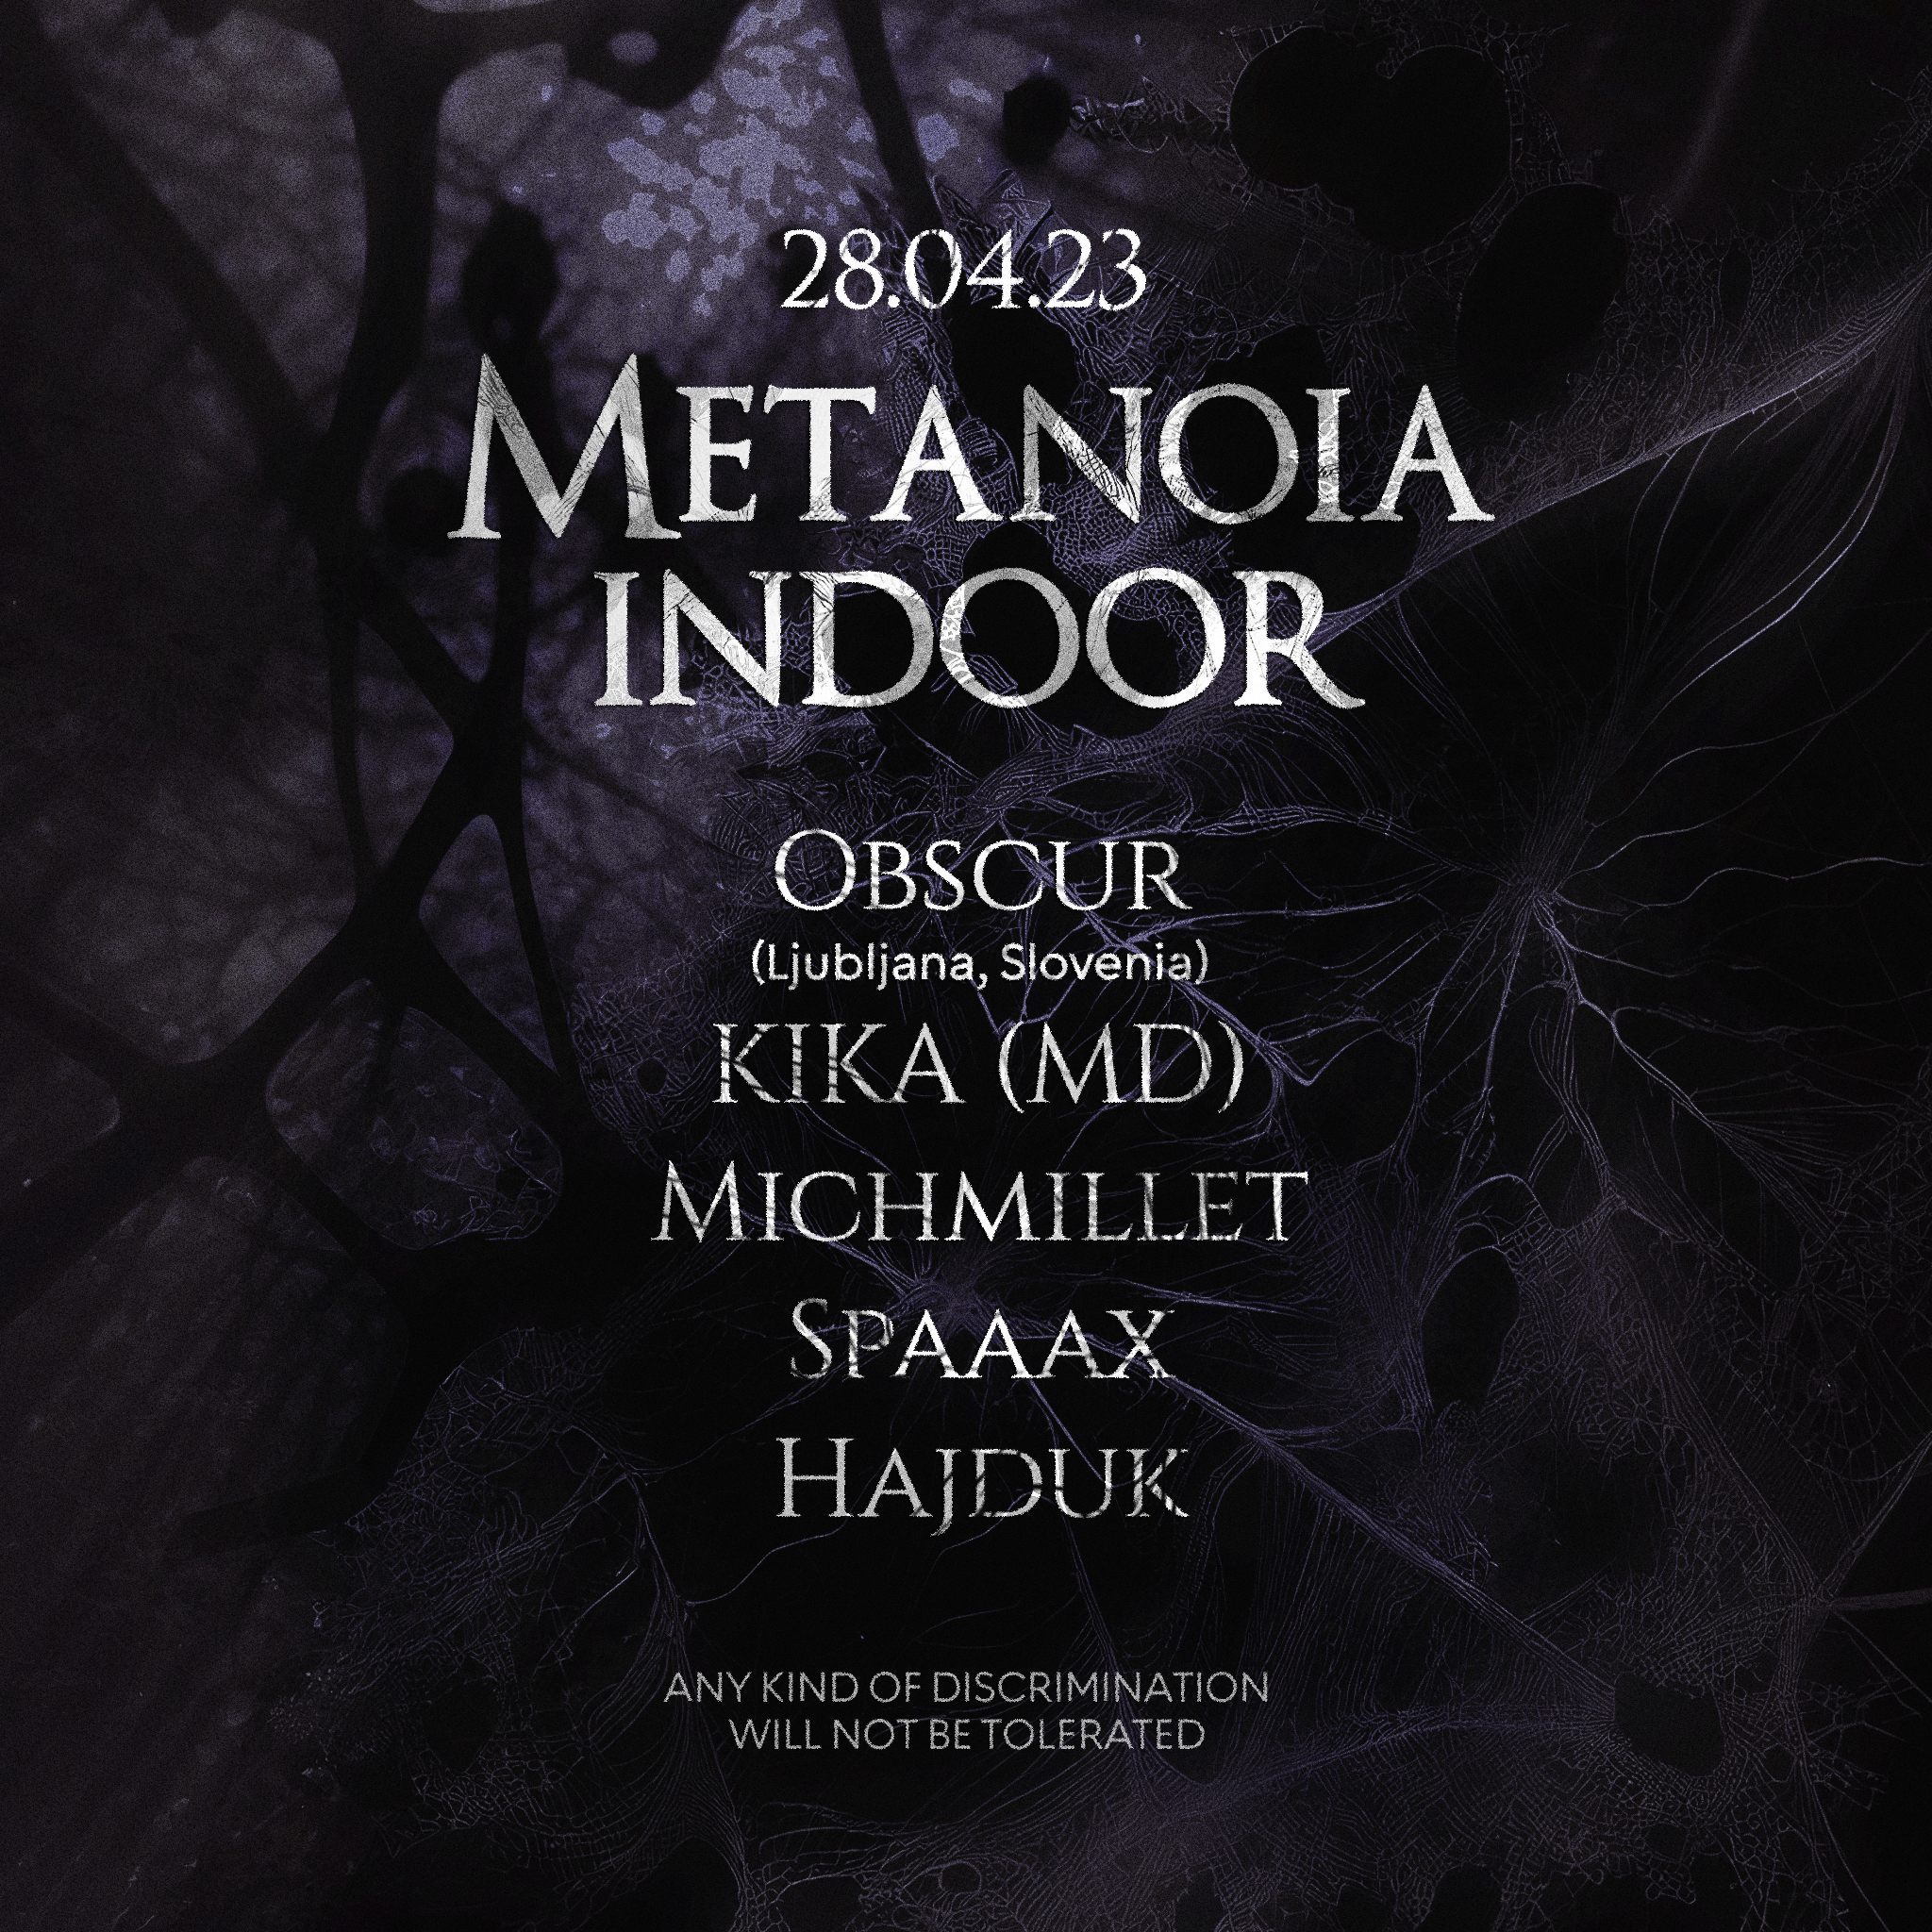 METANOIA INDOOR with Obscur - フライヤー表